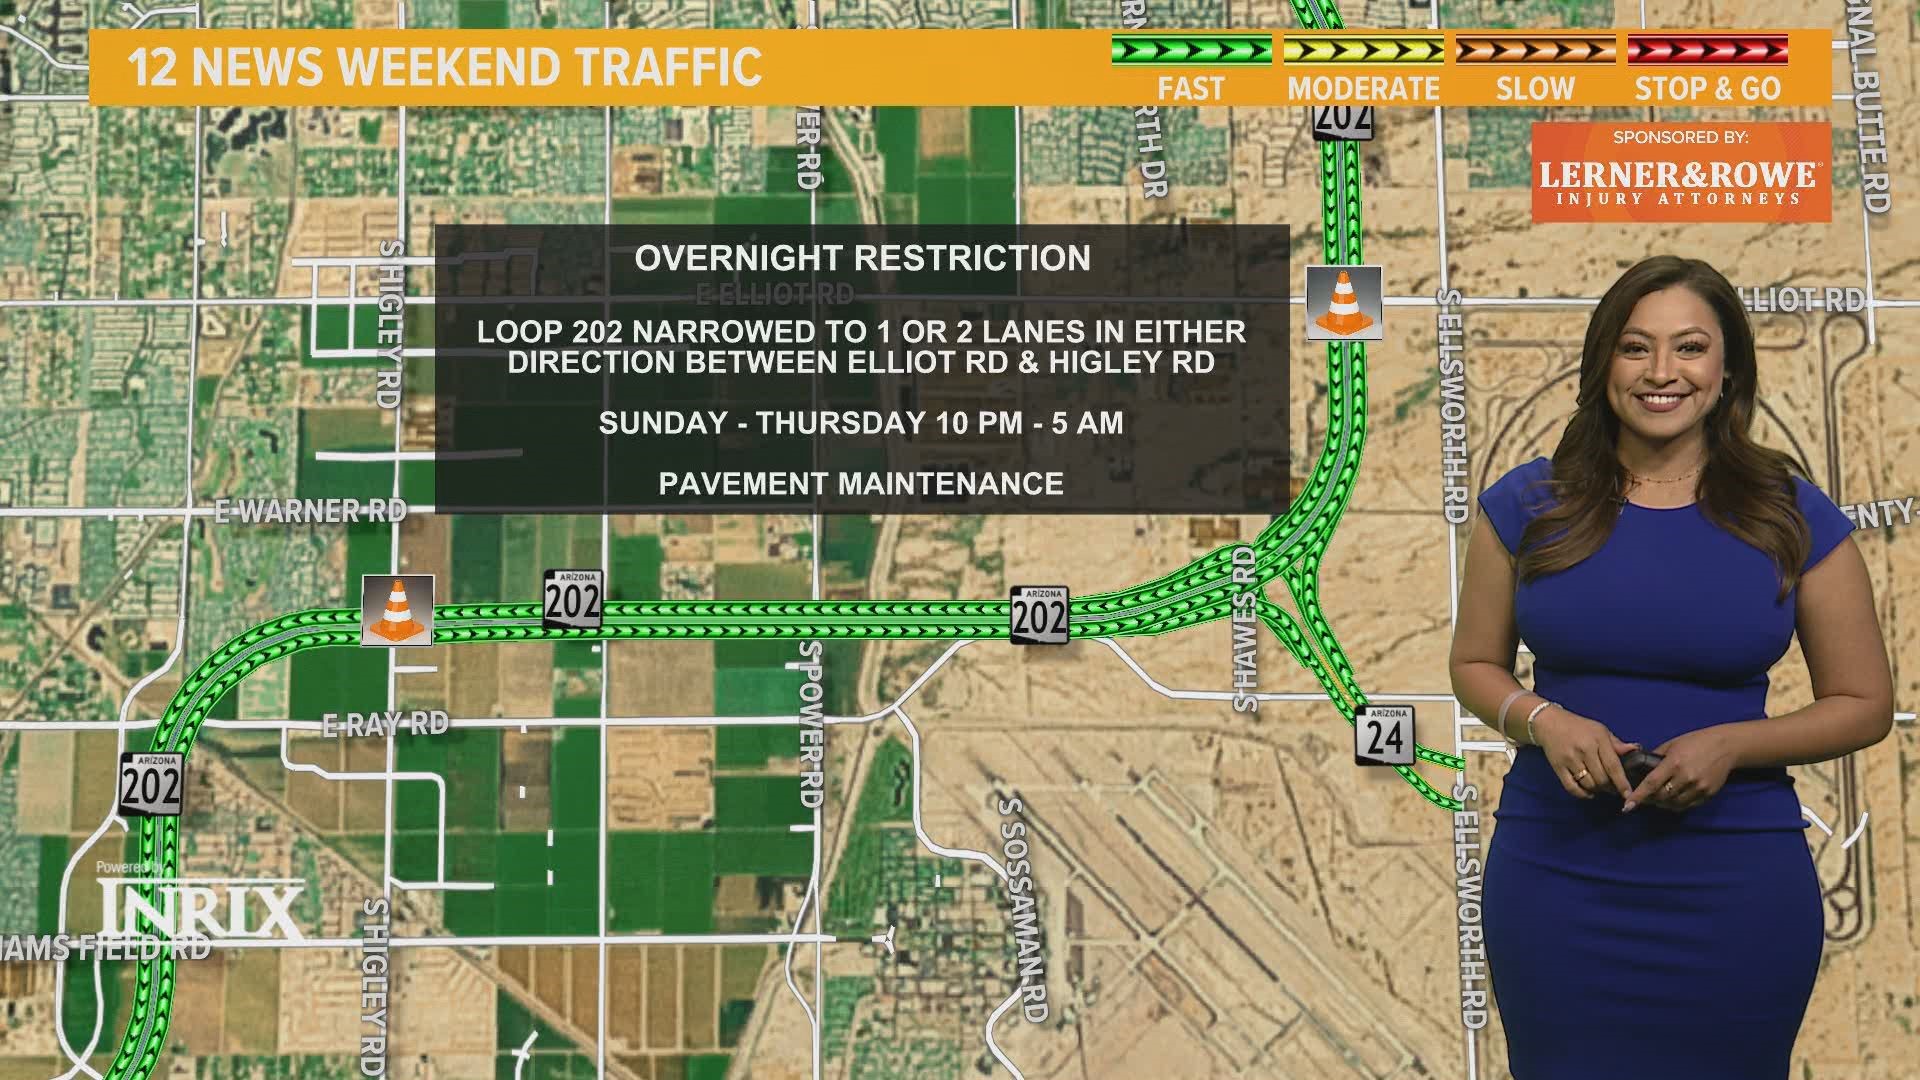 Here's the latest information on the road closures and detours Valley drivers will encounter this weekend. Vanessa Ramirez has the details.